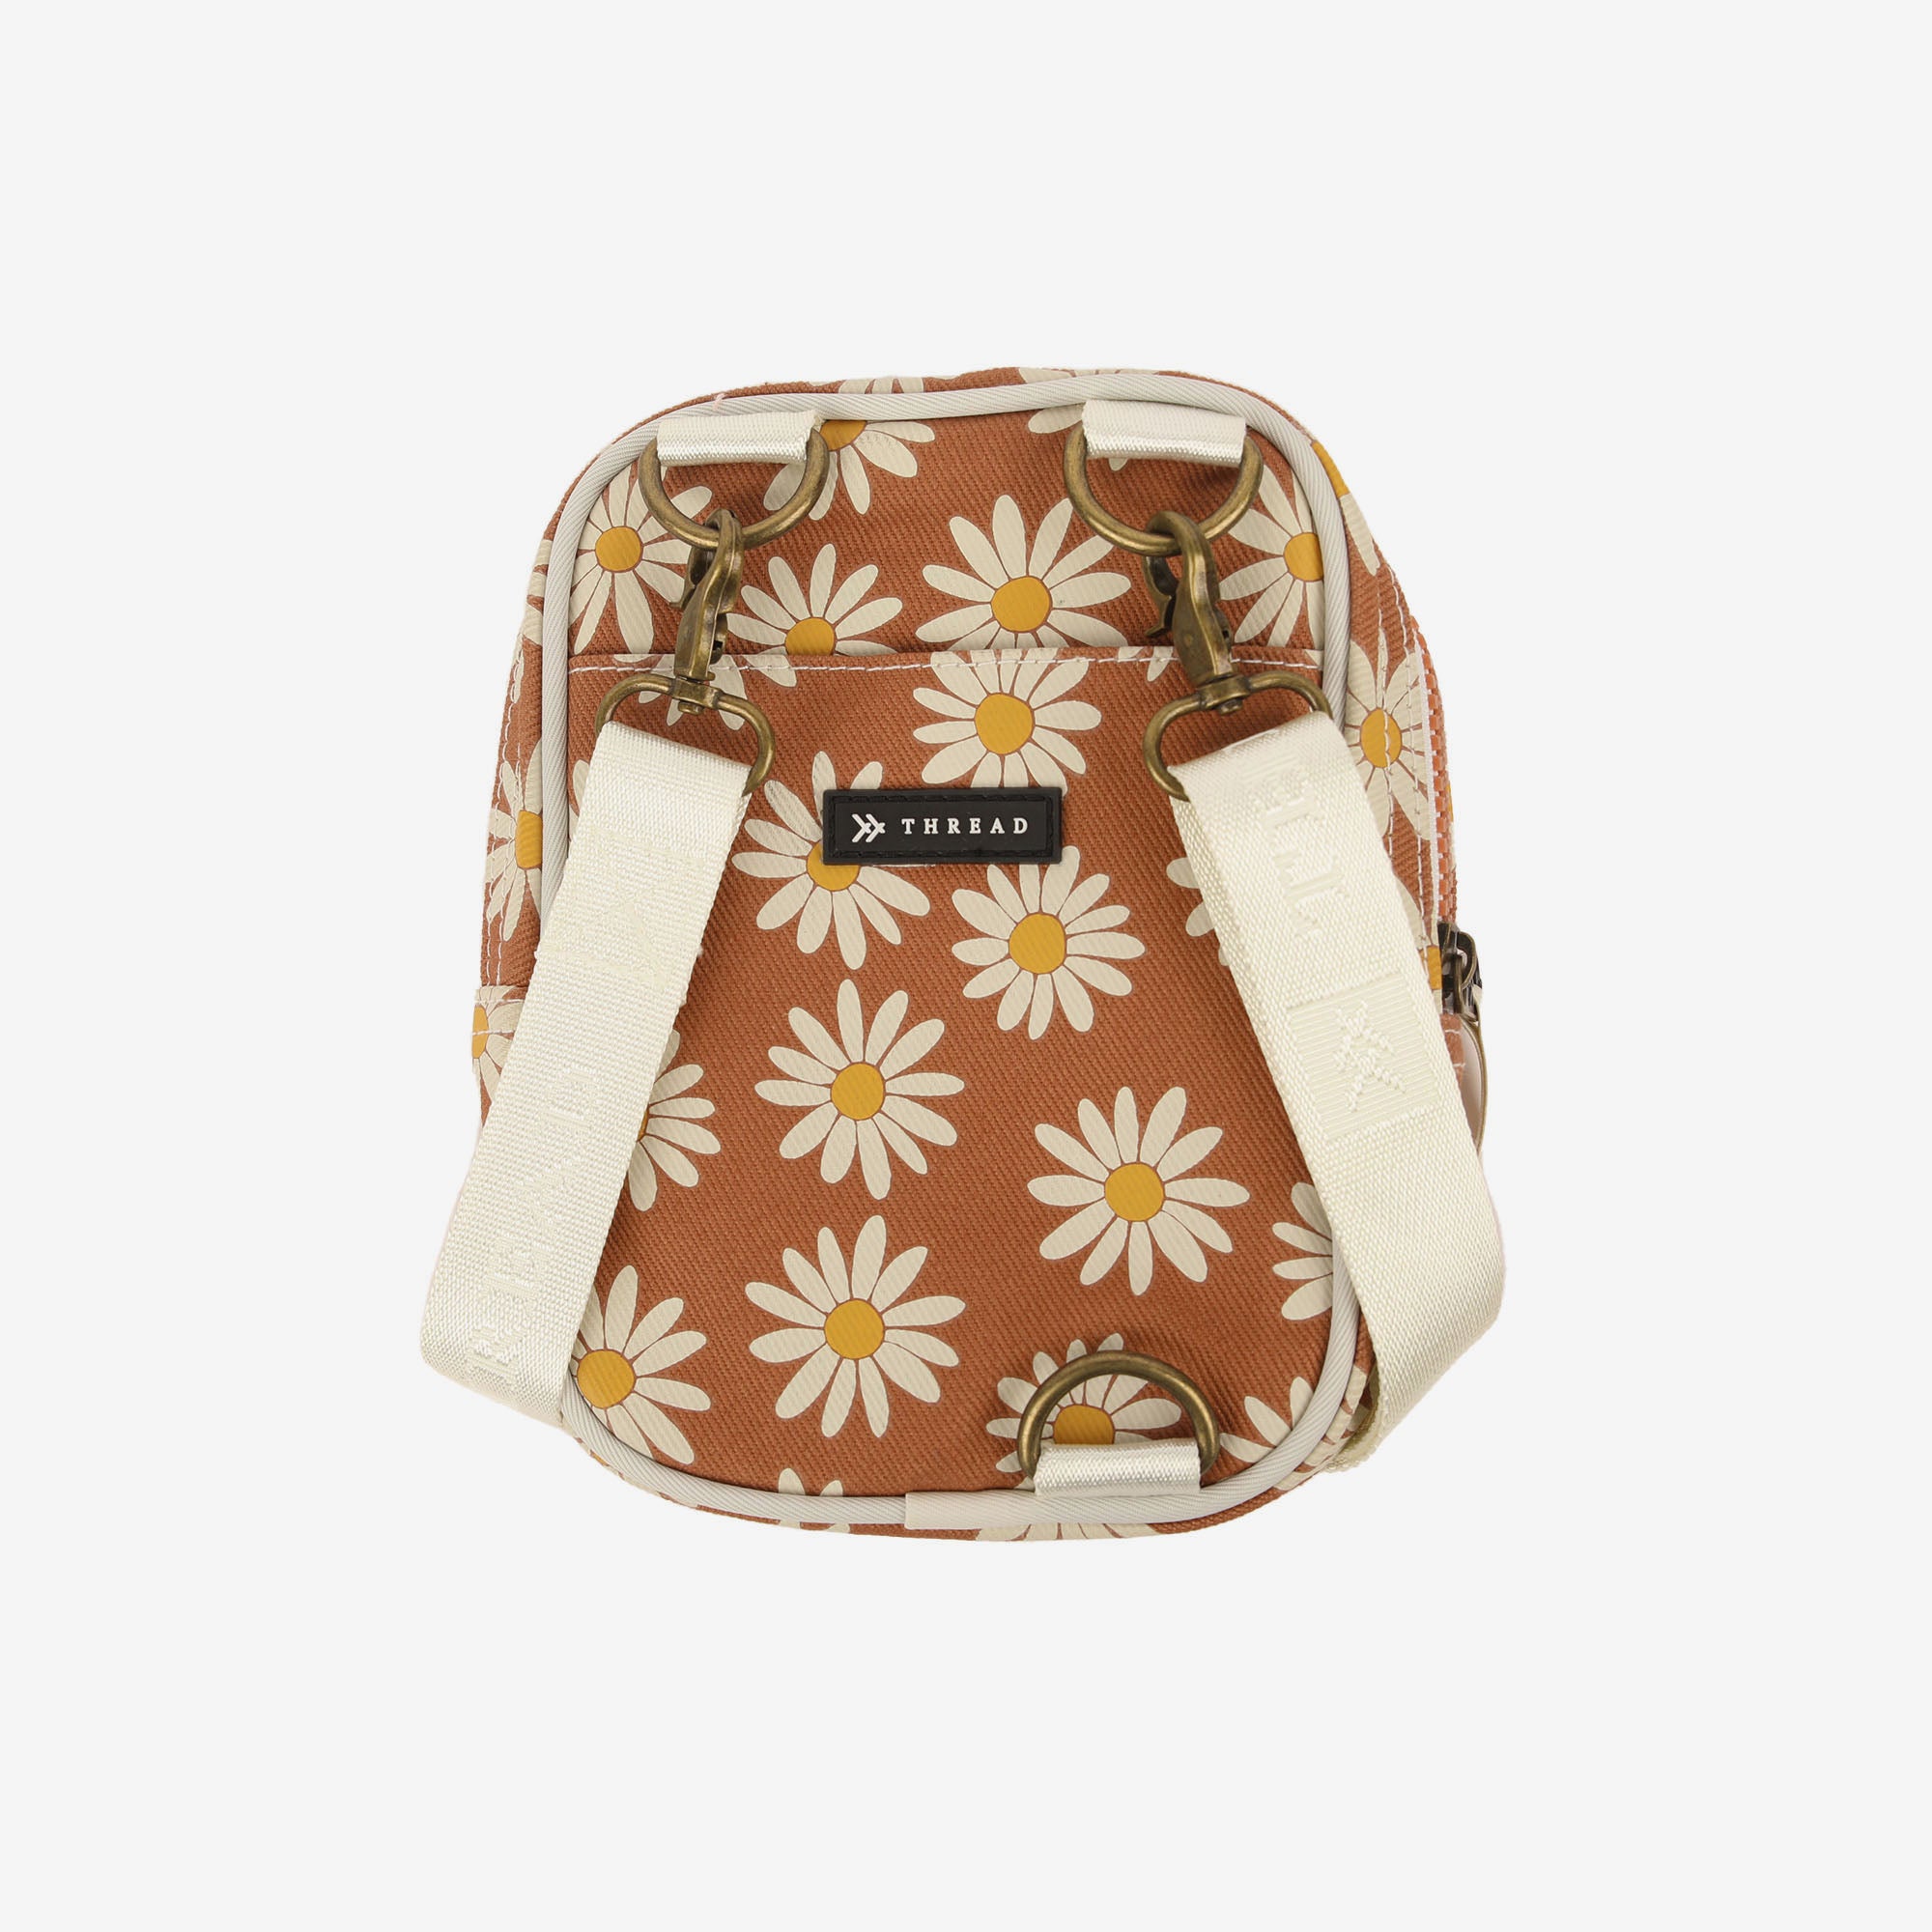 Brown and cream floral crossbody bag